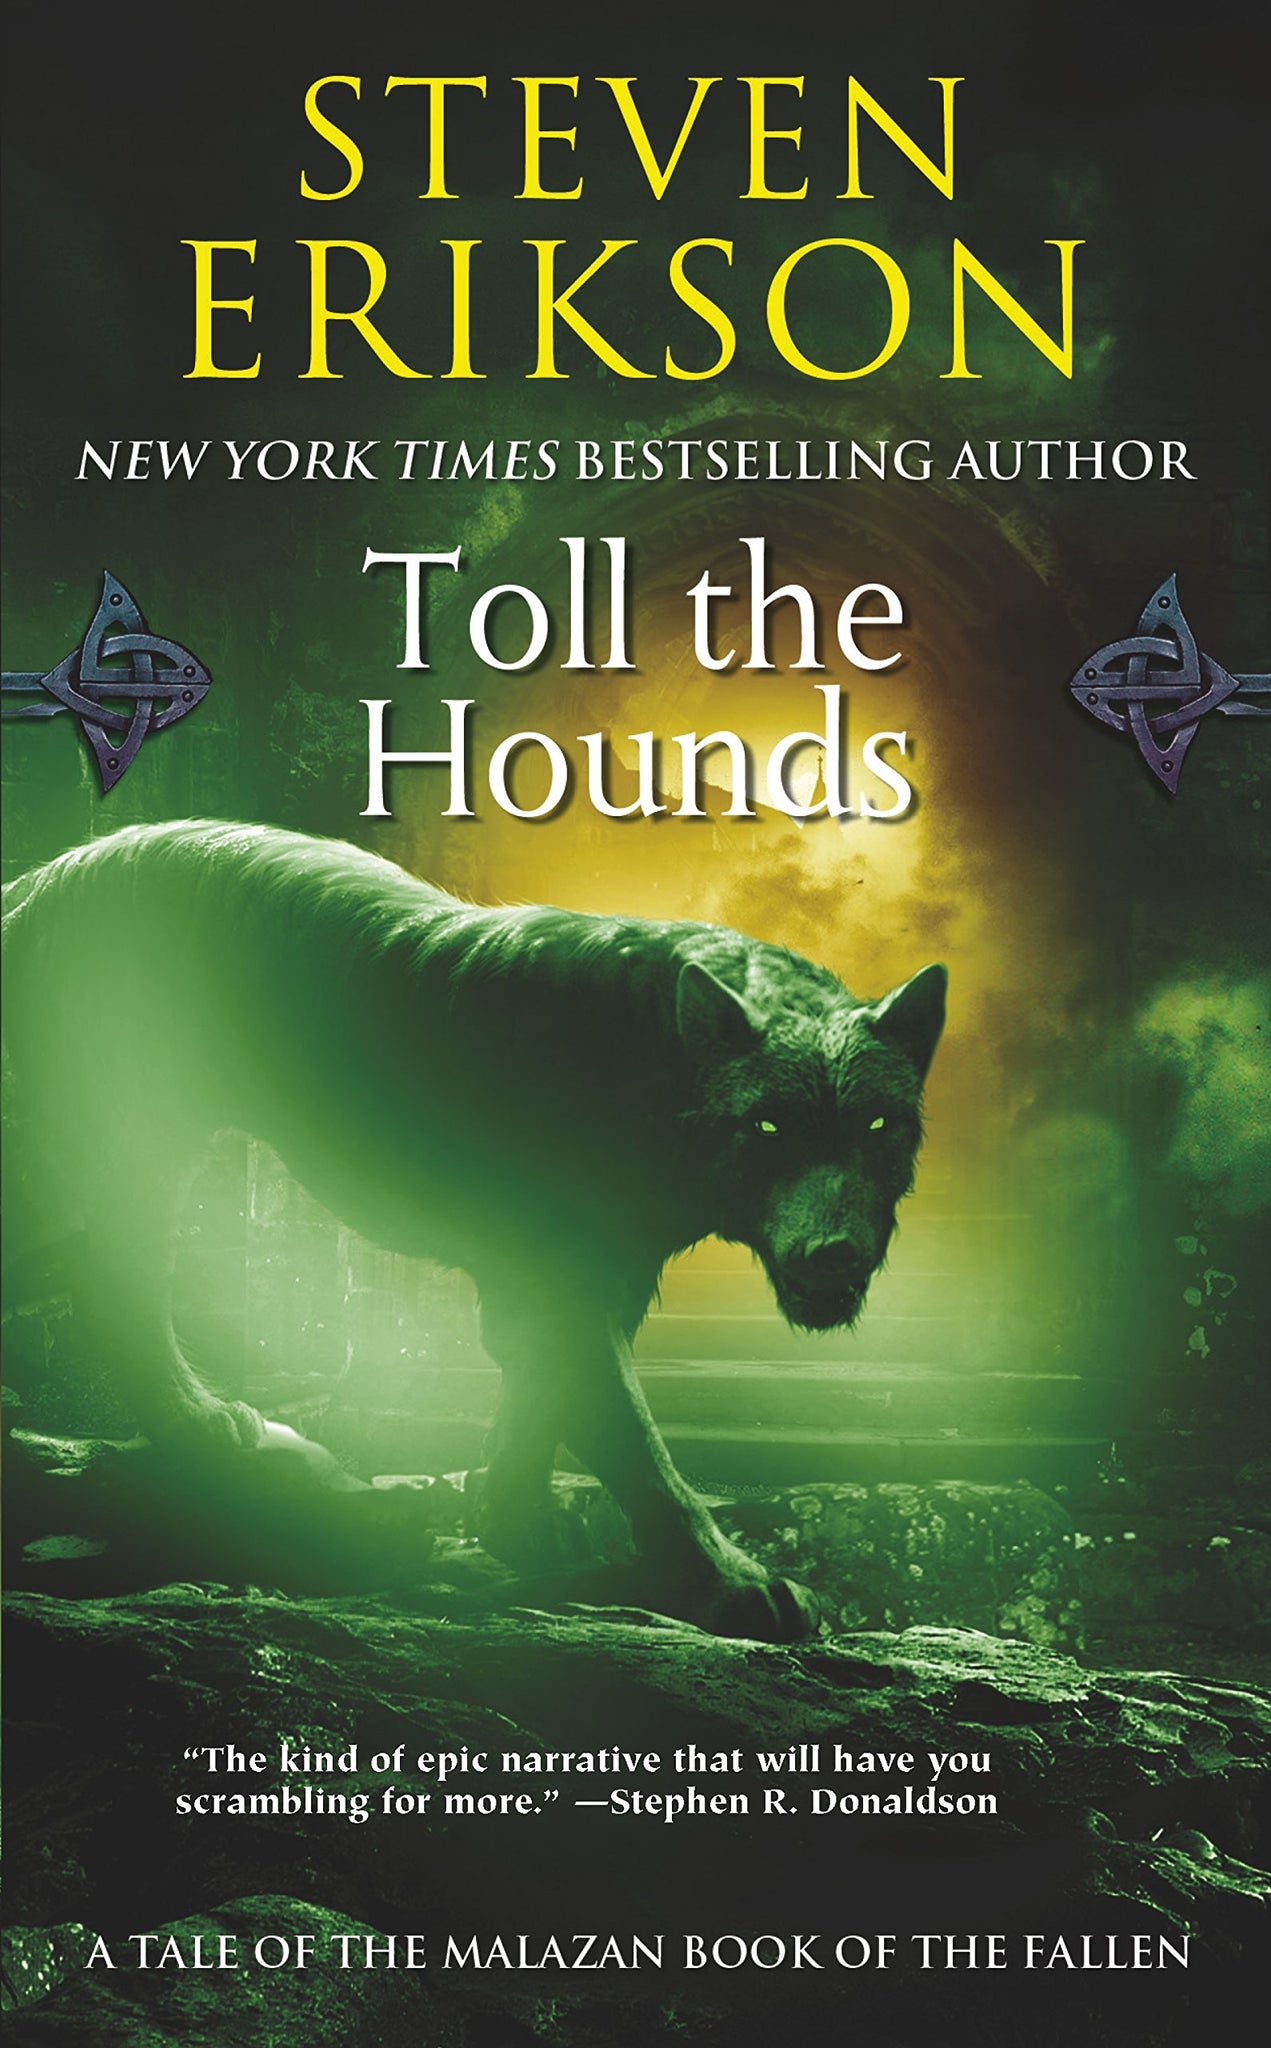 Malazan Book of the Fallen #8 : Toll the Hounds by Steven Erikson